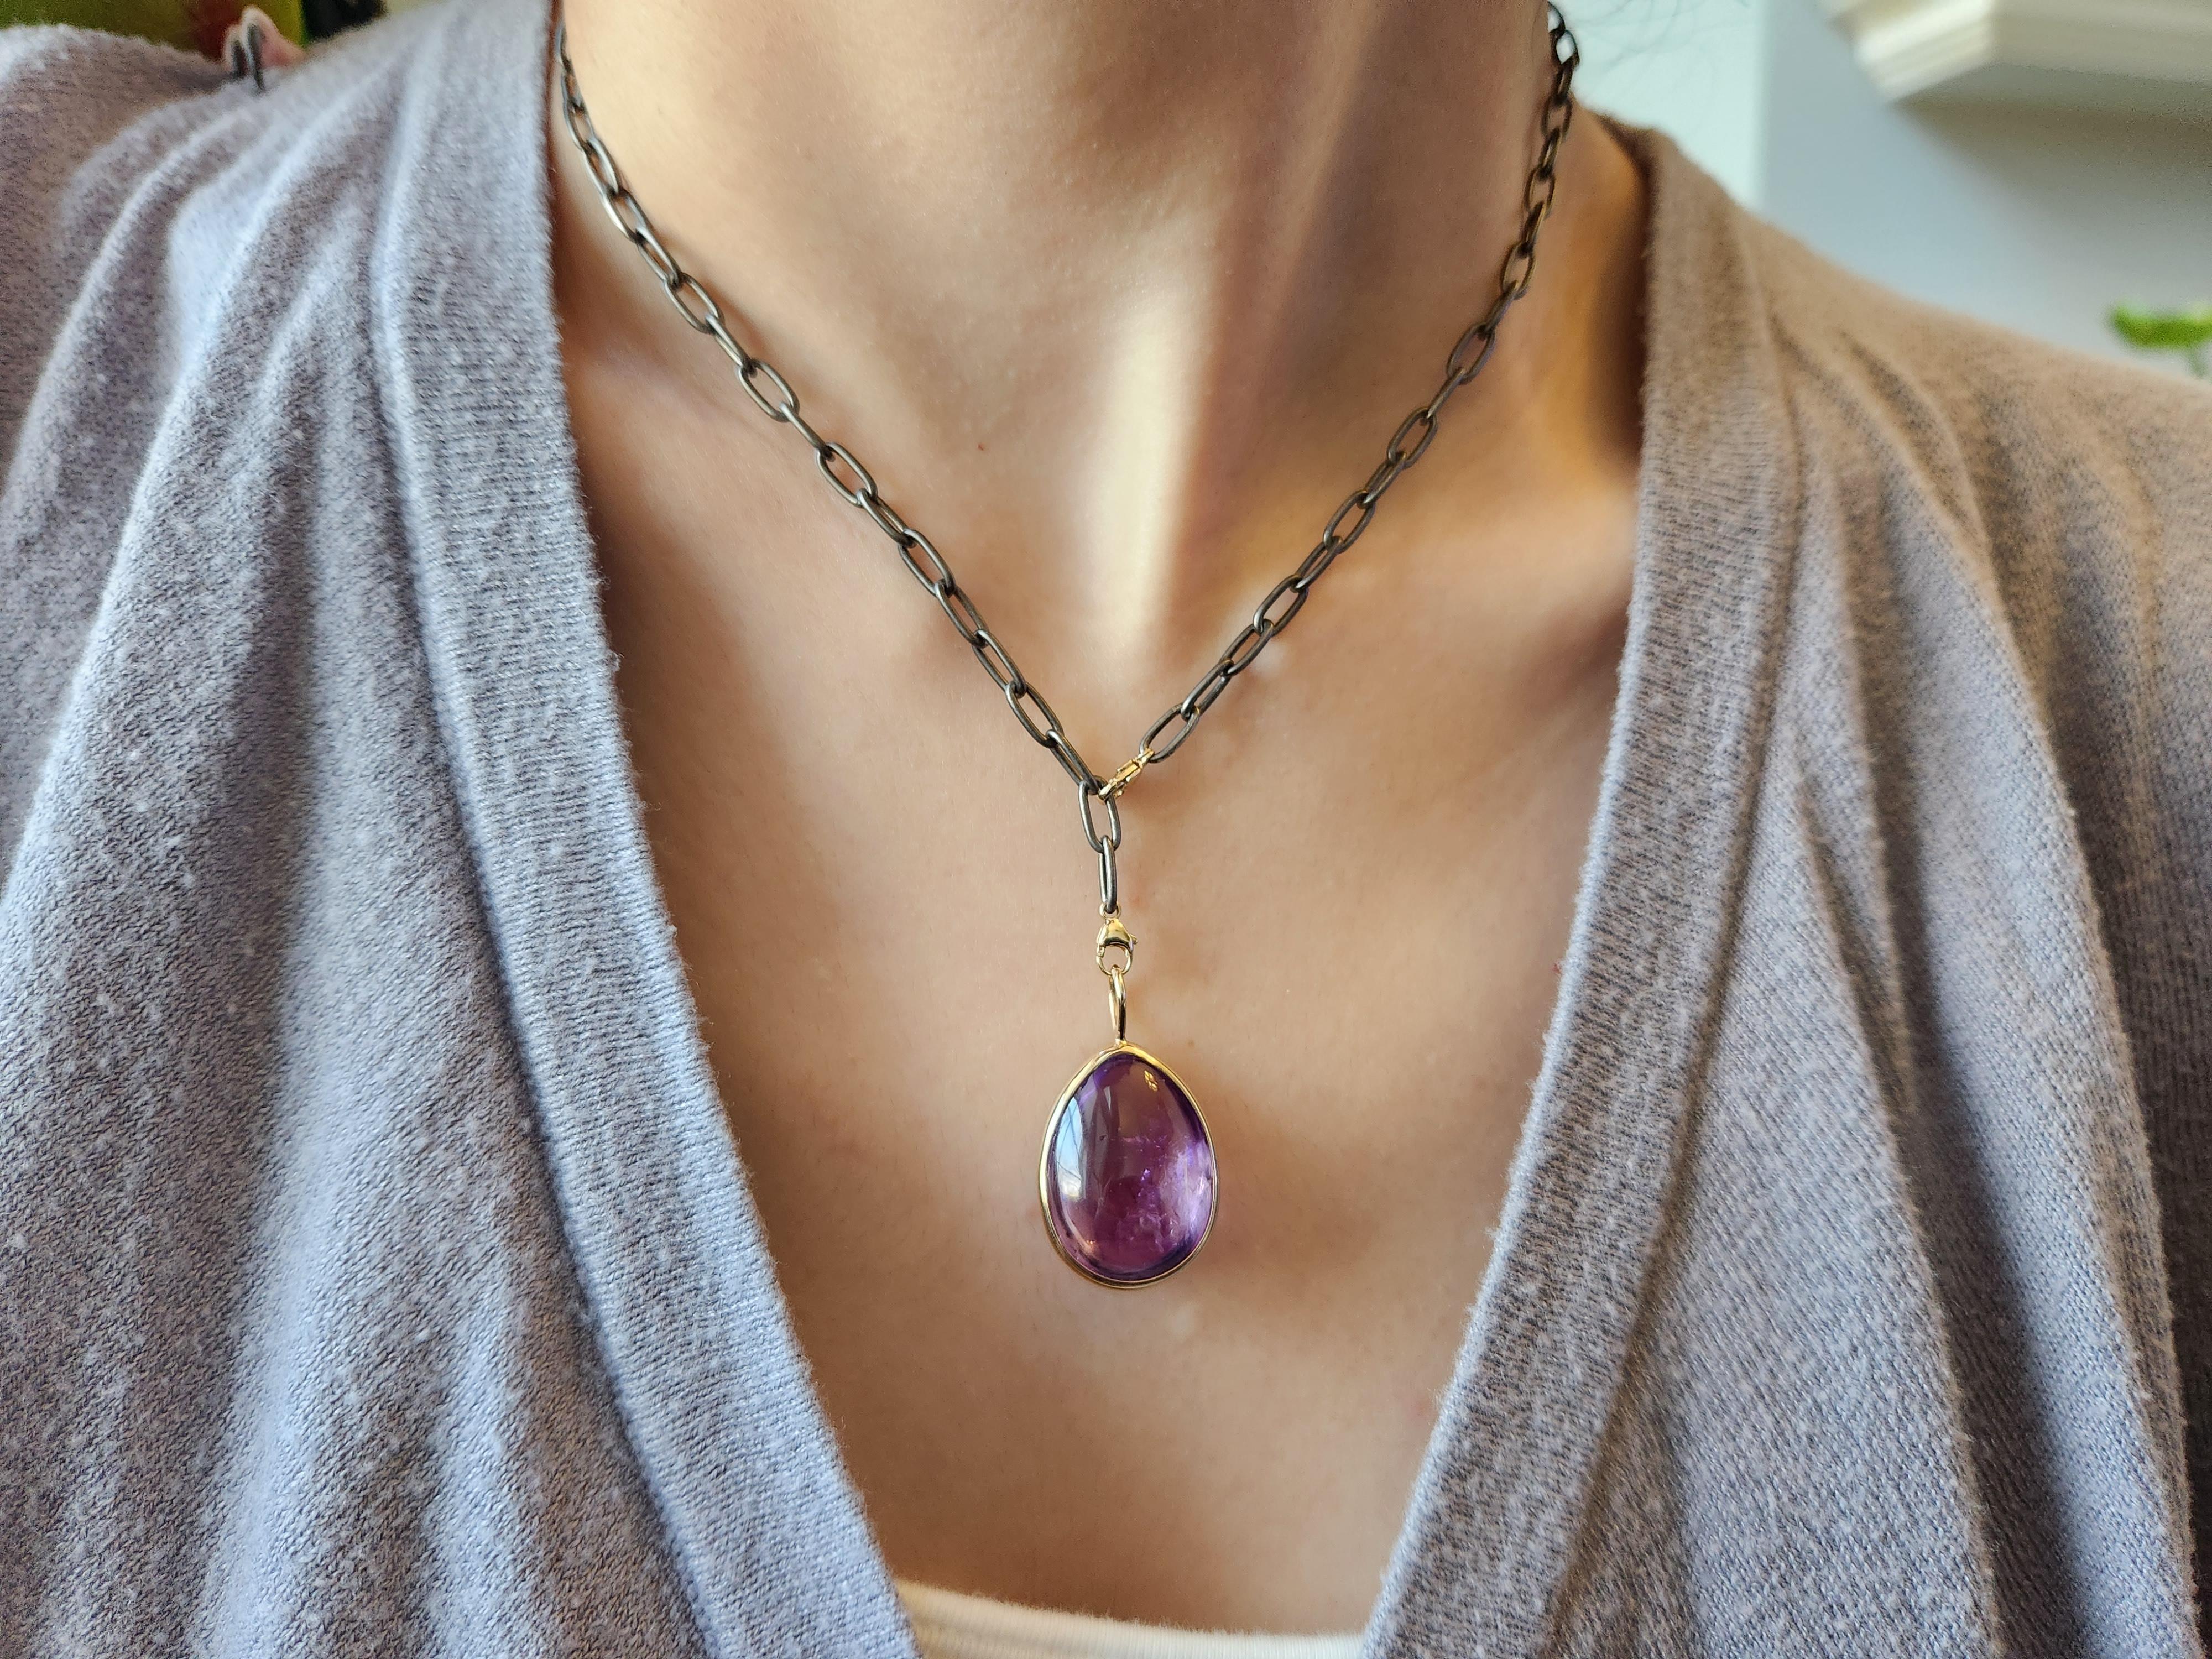 14K Set Amethyst Enhydro Tear Drop Power Necklace with Blackened Silver Chain In New Condition For Sale In Rutherford, NJ